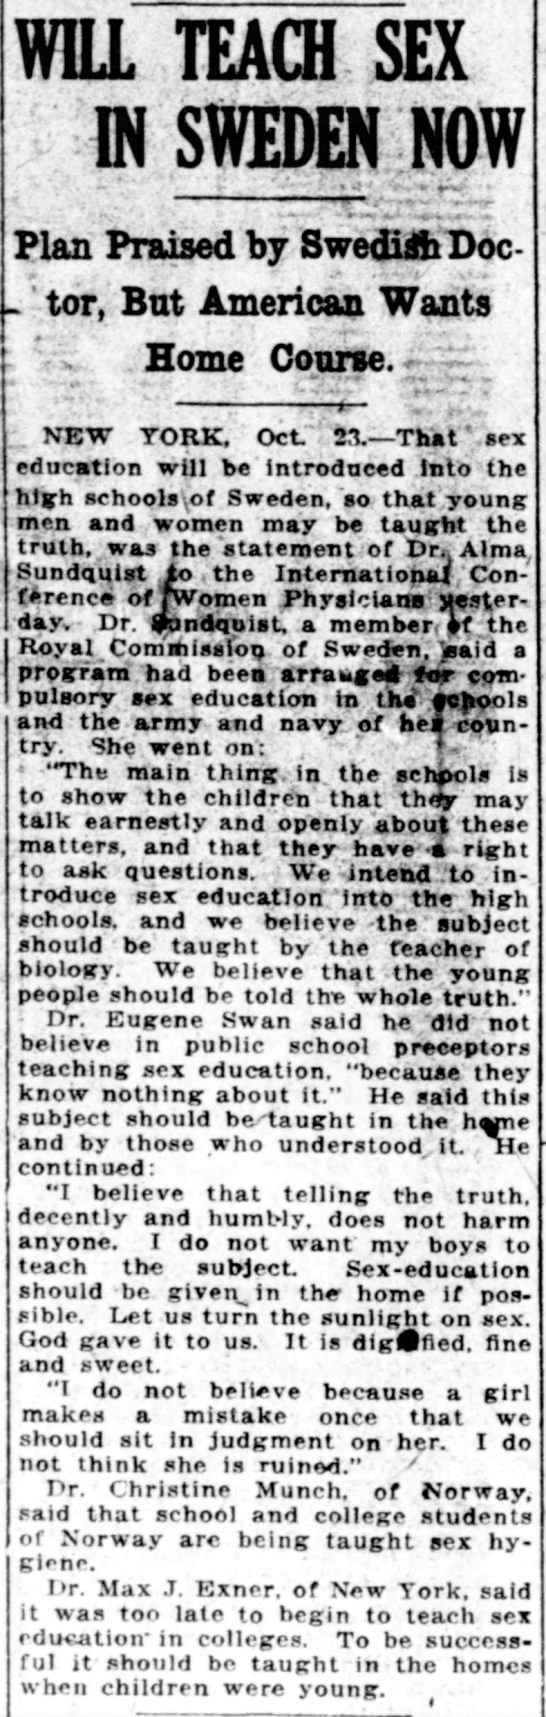 Will Teach Sex in Sweden Now. The Washington Times (Washington, D. C.) 23 October 1919, p 2 - 